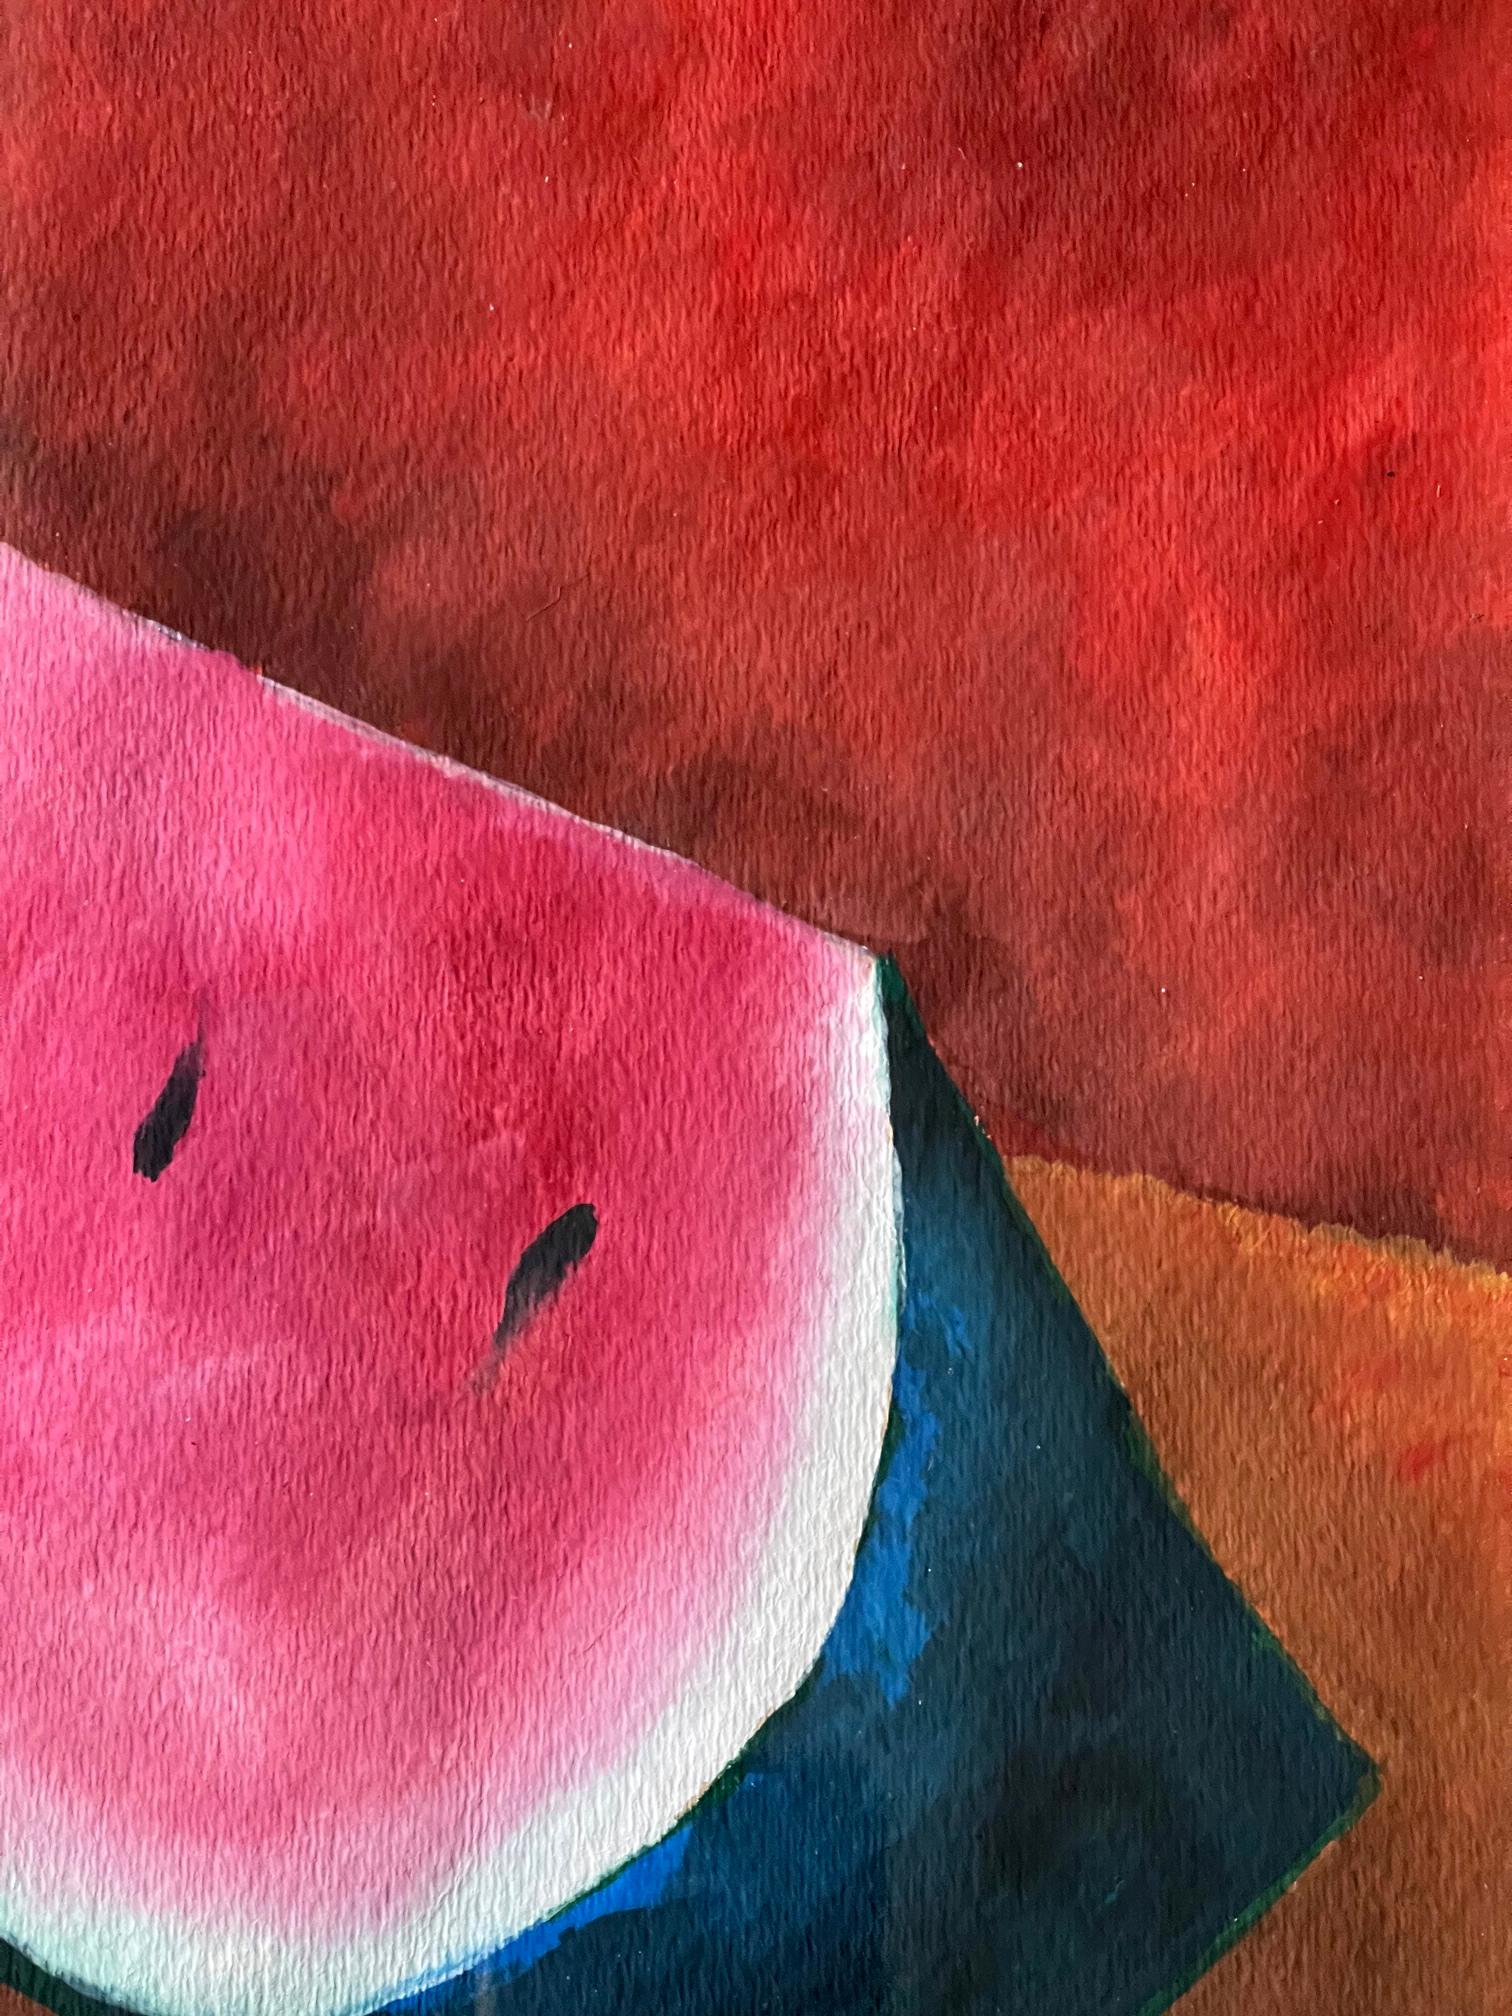 Framed Mexican Watercolor on Paper Attributed to Rufino Tamayo For Sale 1